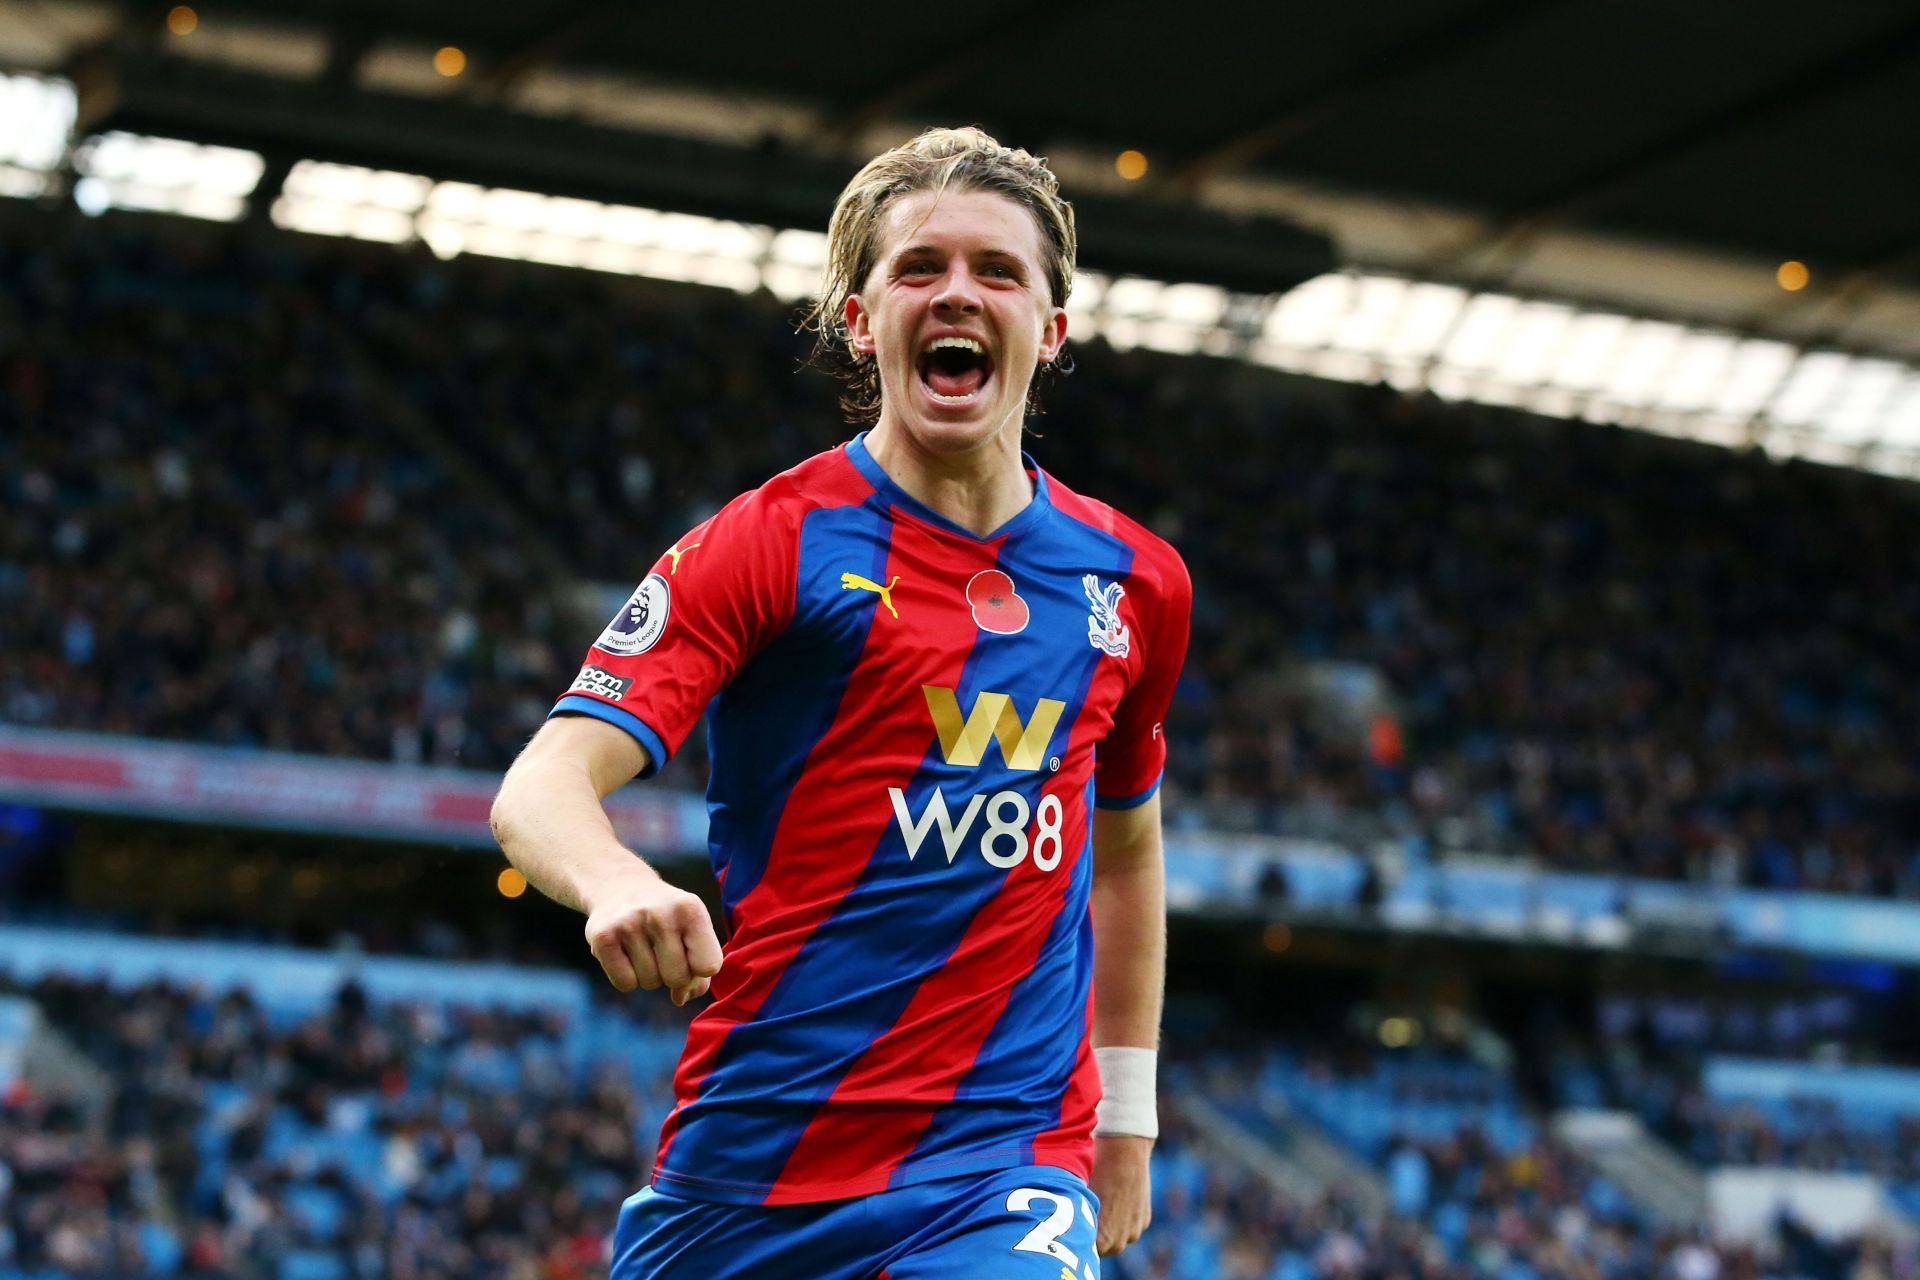 Gallagher has made a real difference for Crystal Palace